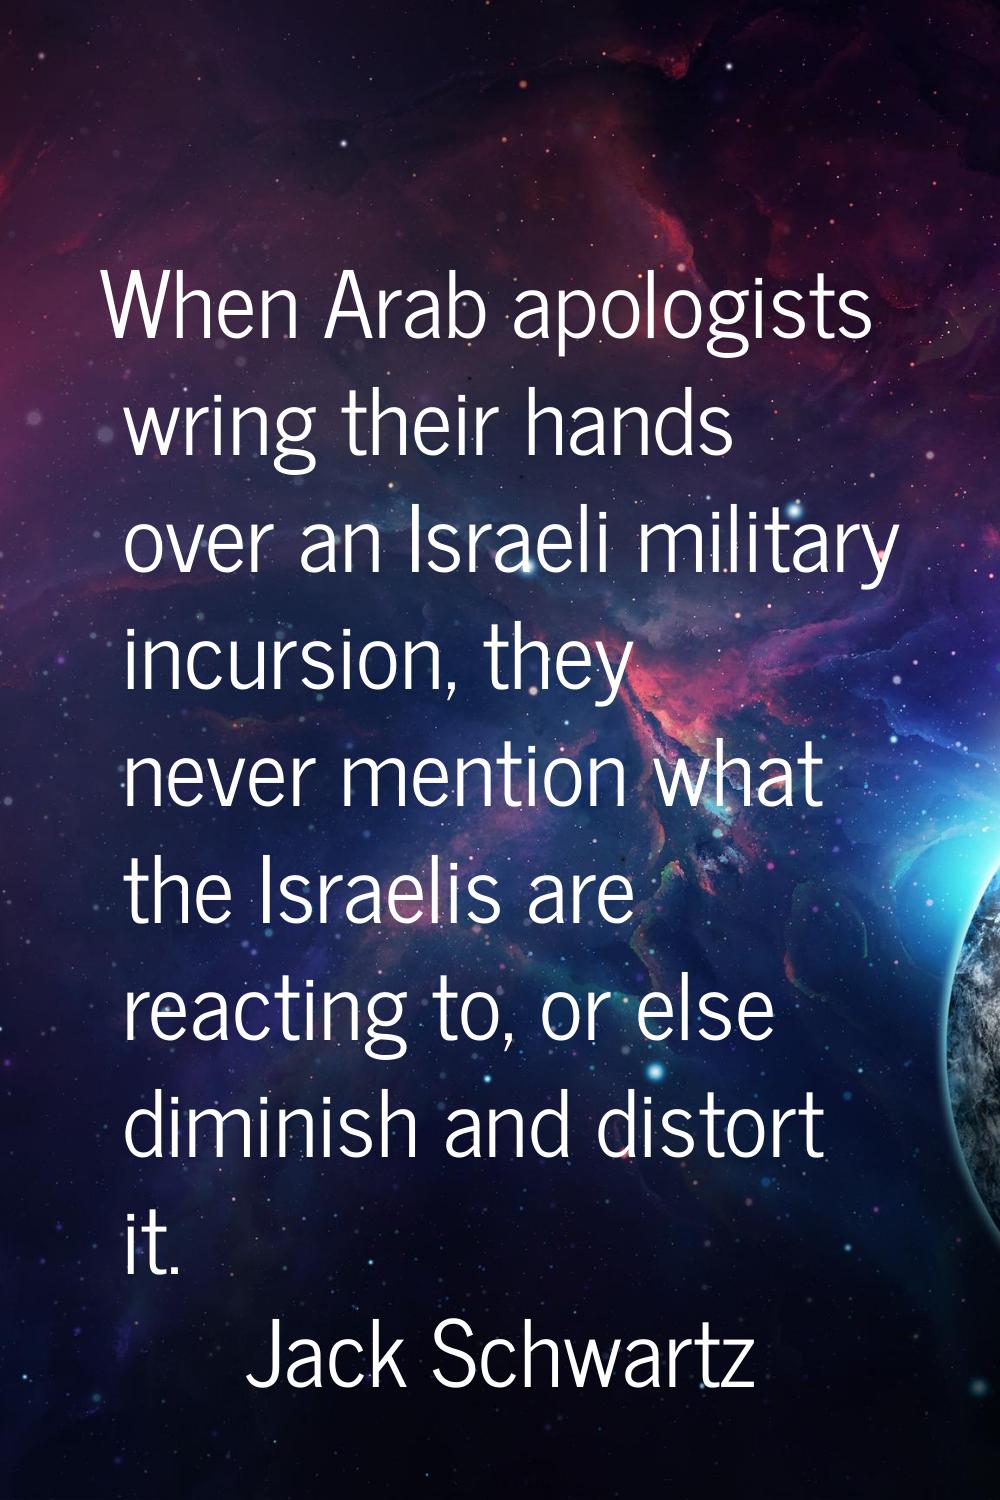 When Arab apologists wring their hands over an Israeli military incursion, they never mention what 